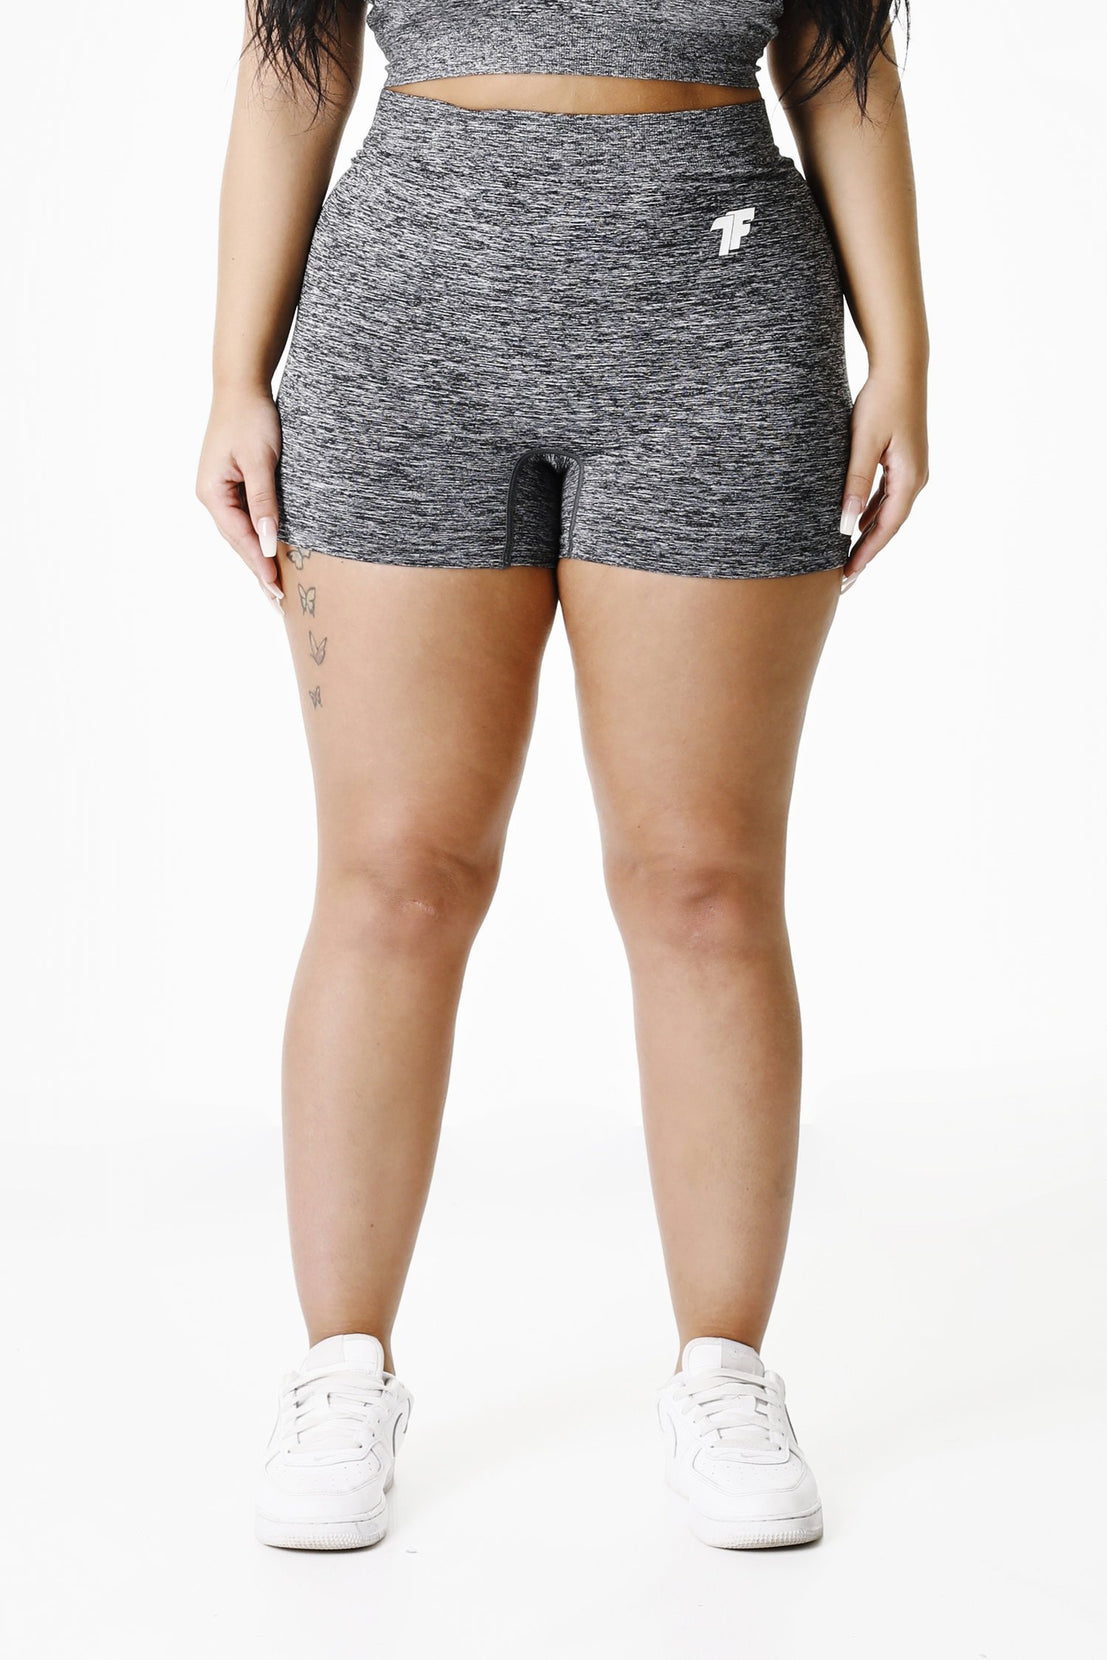 Womens Charcoal Shorts for Gym Wear in UK